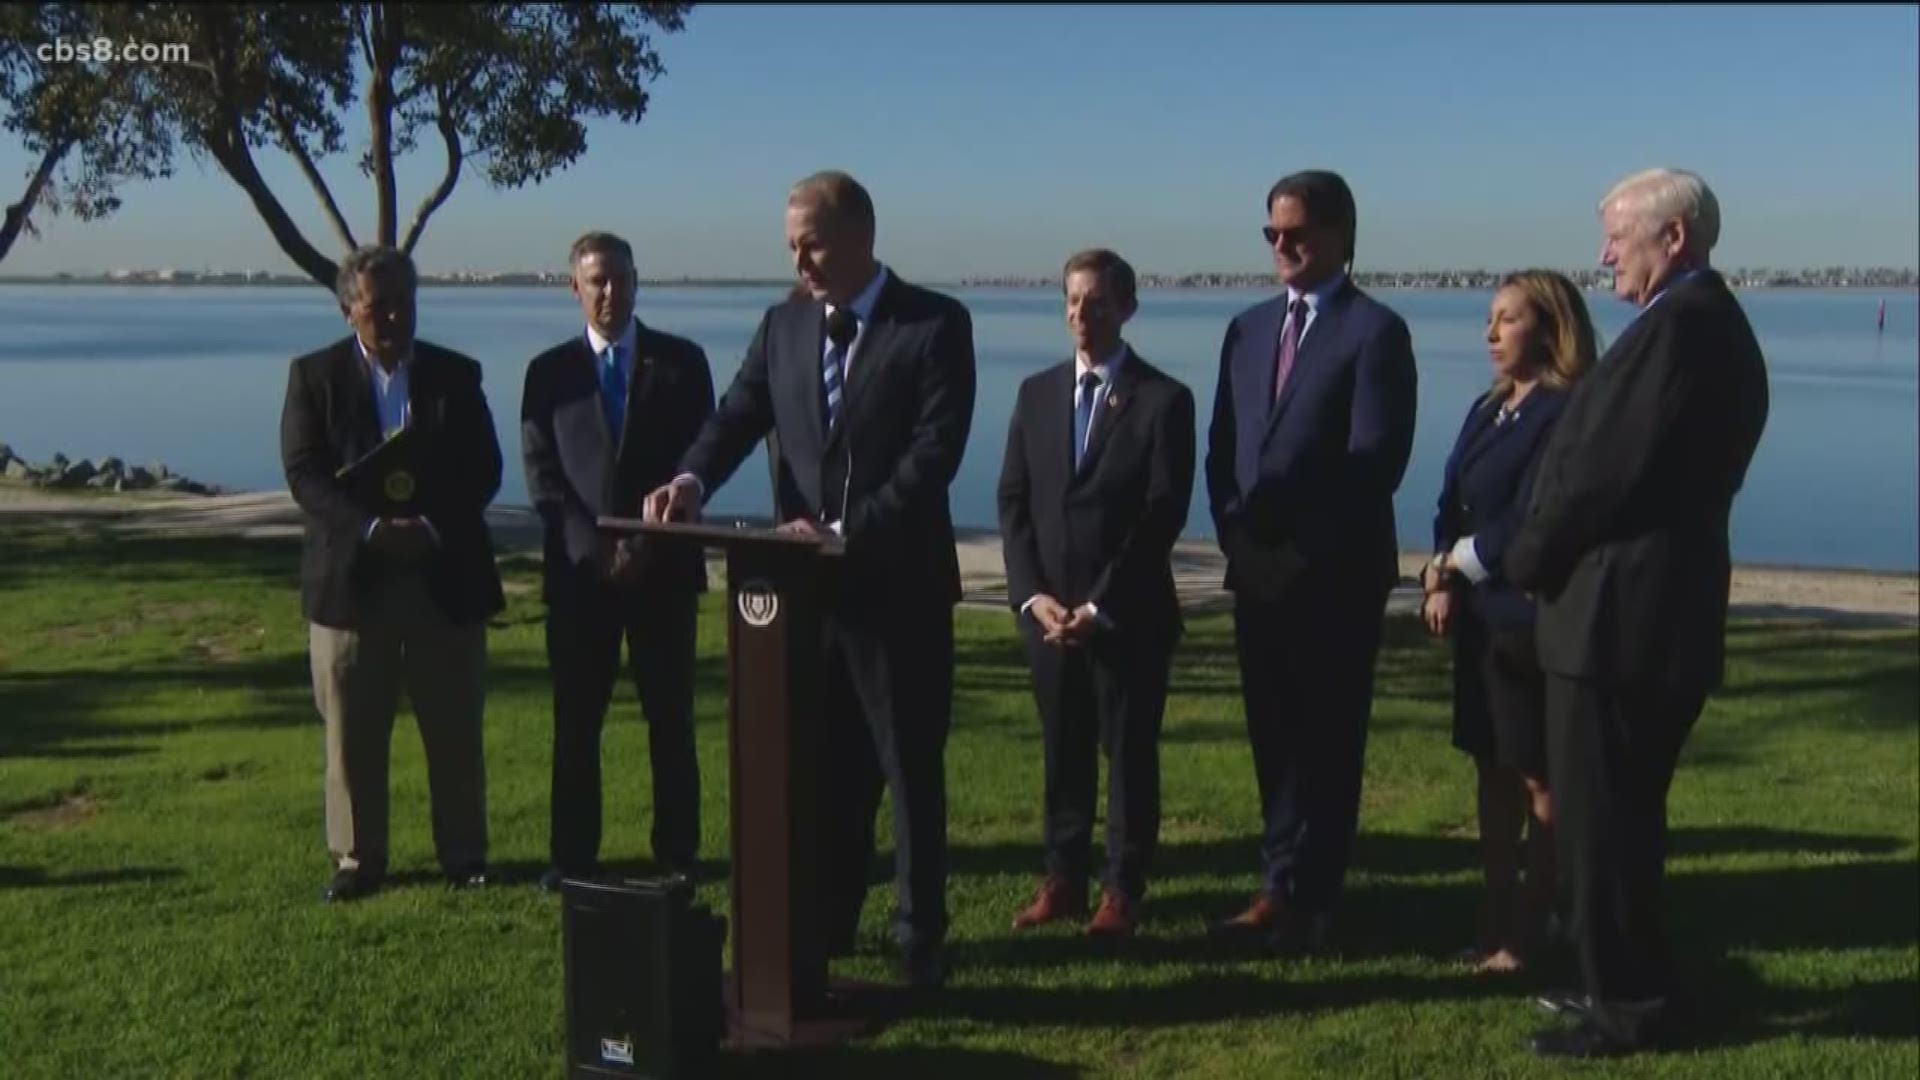 The officials discussed the $300 million in the international agreement to fund the Border Water Infrastructure Project to address pollution in the Tijuana River.